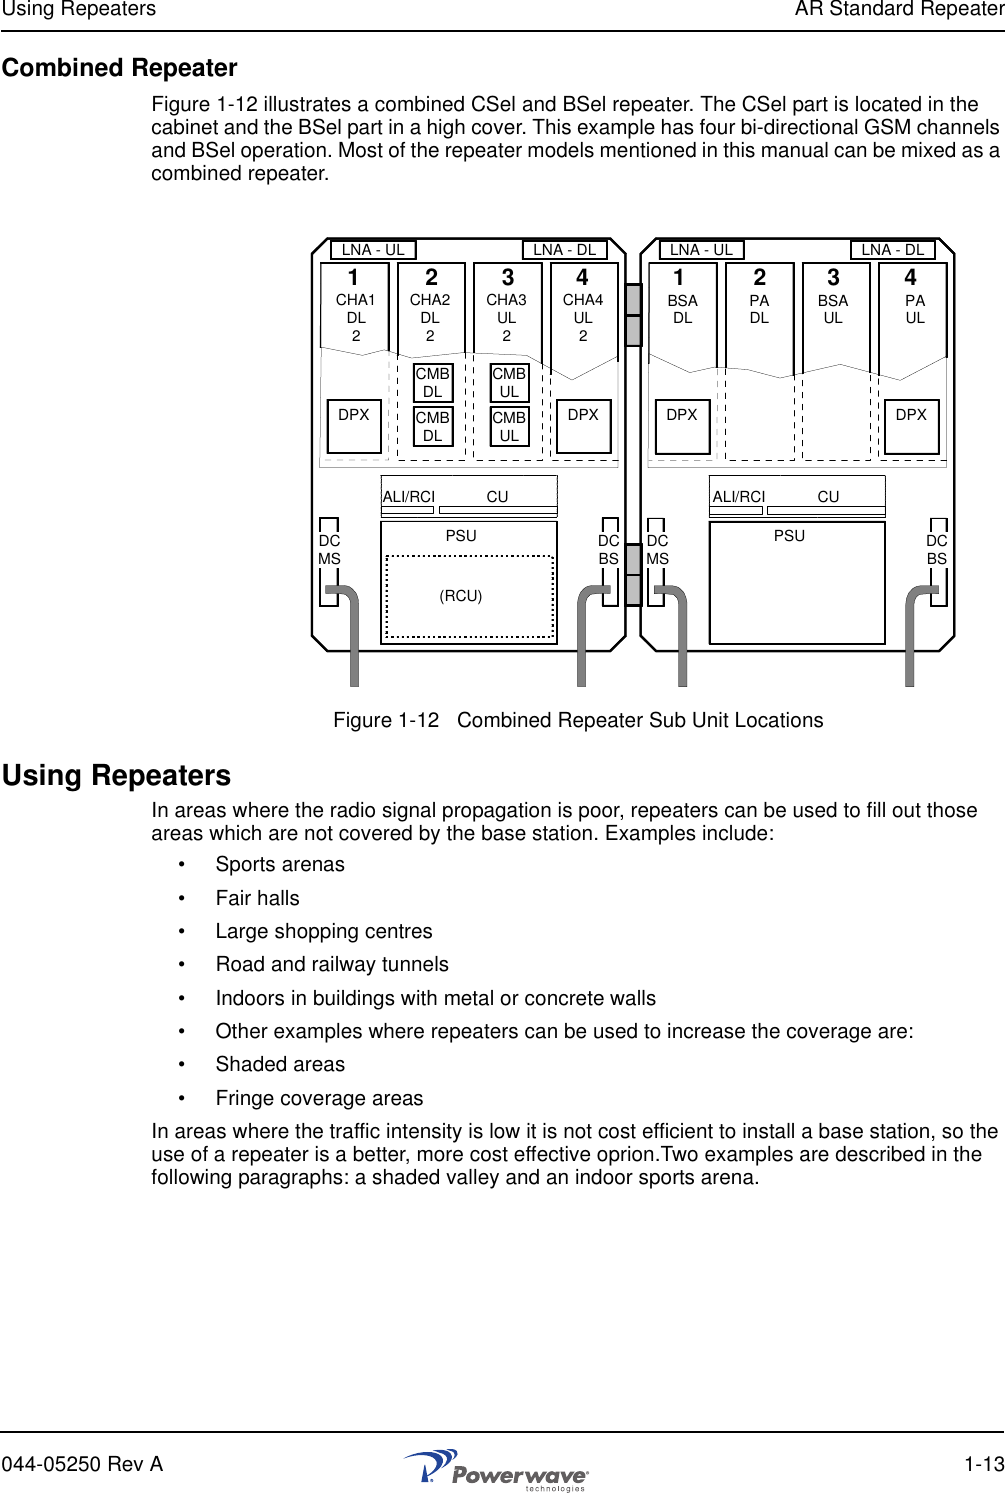 Using Repeaters AR Standard Repeater044-05250 Rev A 1-13Combined RepeaterFigure 1-12 illustrates a combined CSel and BSel repeater. The CSel part is located in the cabinet and the BSel part in a high cover. This example has four bi-directional GSM channels and BSel operation. Most of the repeater models mentioned in this manual can be mixed as a combined repeater.Figure 1-12   Combined Repeater Sub Unit LocationsUsing RepeatersIn areas where the radio signal propagation is poor, repeaters can be used to fill out those areas which are not covered by the base station. Examples include:• Sports arenas•Fair halls• Large shopping centres• Road and railway tunnels• Indoors in buildings with metal or concrete walls• Other examples where repeaters can be used to increase the coverage are:• Shaded areas• Fringe coverage areasIn areas where the traffic intensity is low it is not cost efficient to install a base station, so the use of a repeater is a better, more cost effective oprion.Two examples are described in the following paragraphs: a shaded valley and an indoor sports arena.LNA - DL1234LNA - ULPSU(RCU)DPXCUALI/RCIDCMS DCBSDPXCHA1DL2CHA2DL2CHA3UL2CHA4UL21234PSUBSADL PADL BSAUL PAULDCMS DCBSDPX DPXCMBDLLNA - DLLNA - ULCMBDLCMBULCMBULCUALI/RCI